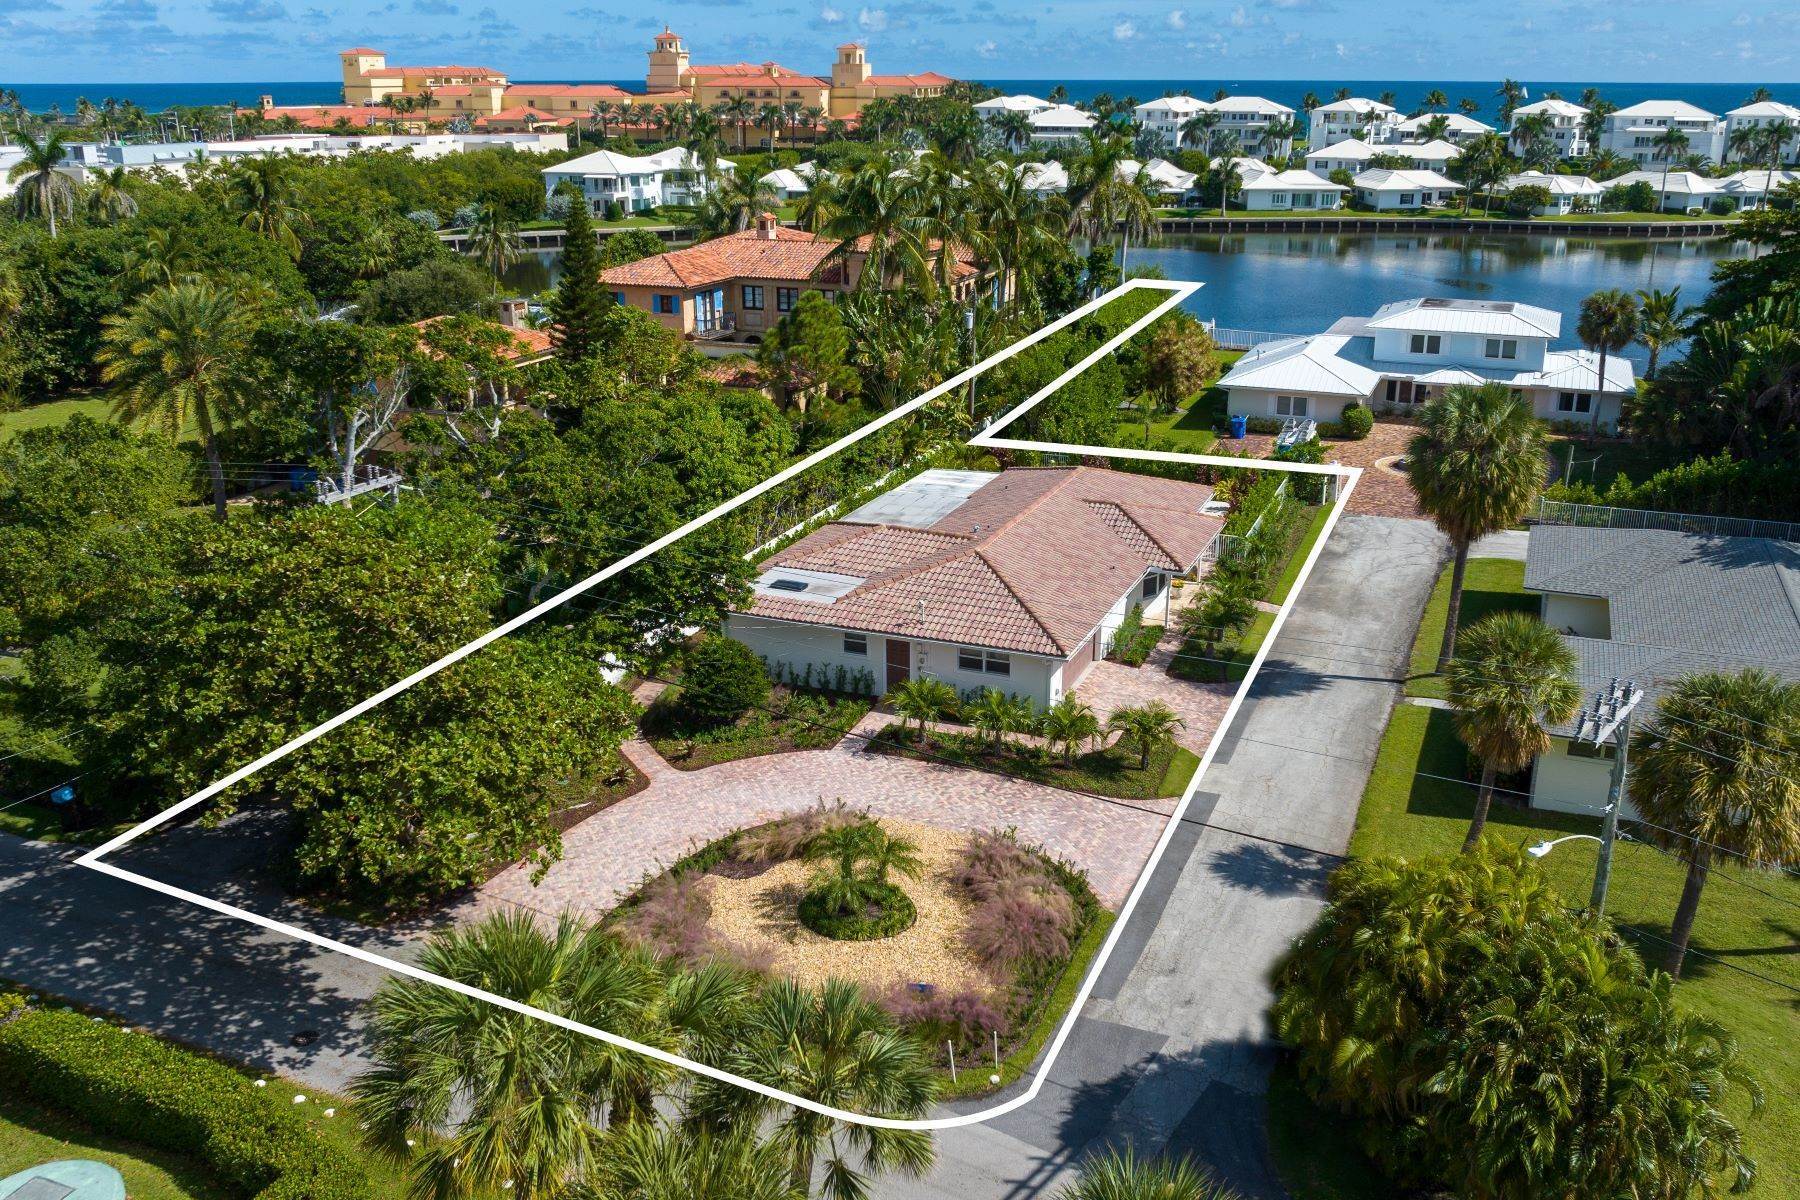 Single Family Homes for Sale at Remodeled Hypoluxo Island Home with 48' Boat Dock 414 Beach Curve Road Lantana, Florida 33462 United States